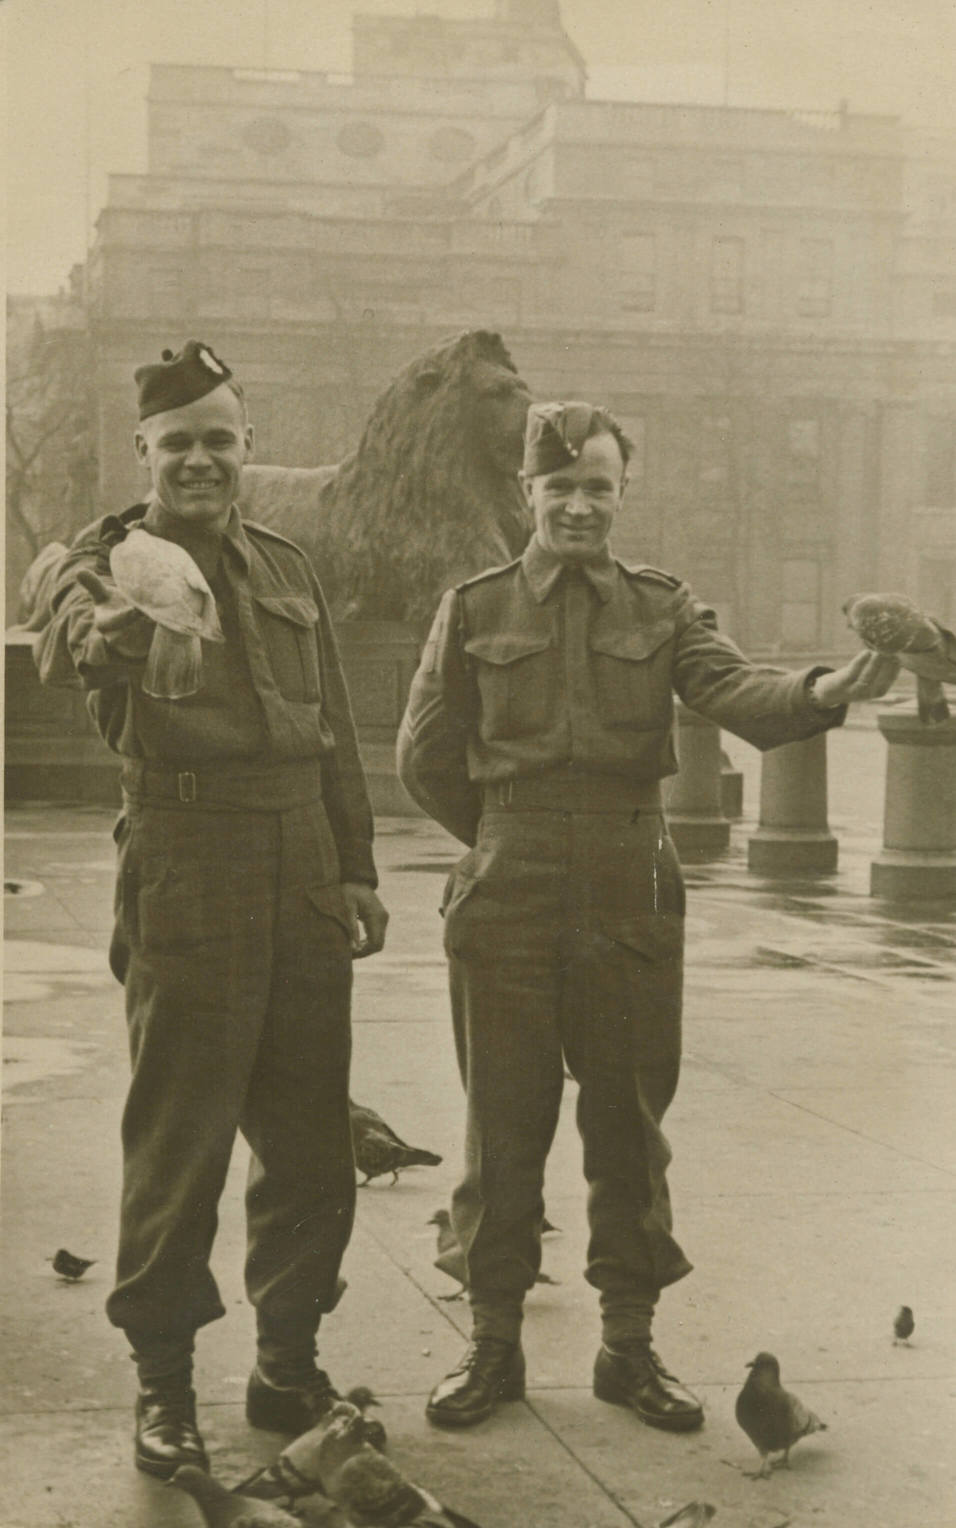 Trafalger Square (January, 1943)
Earl Hamilton 14th R.C.A. and the “old bird man”.